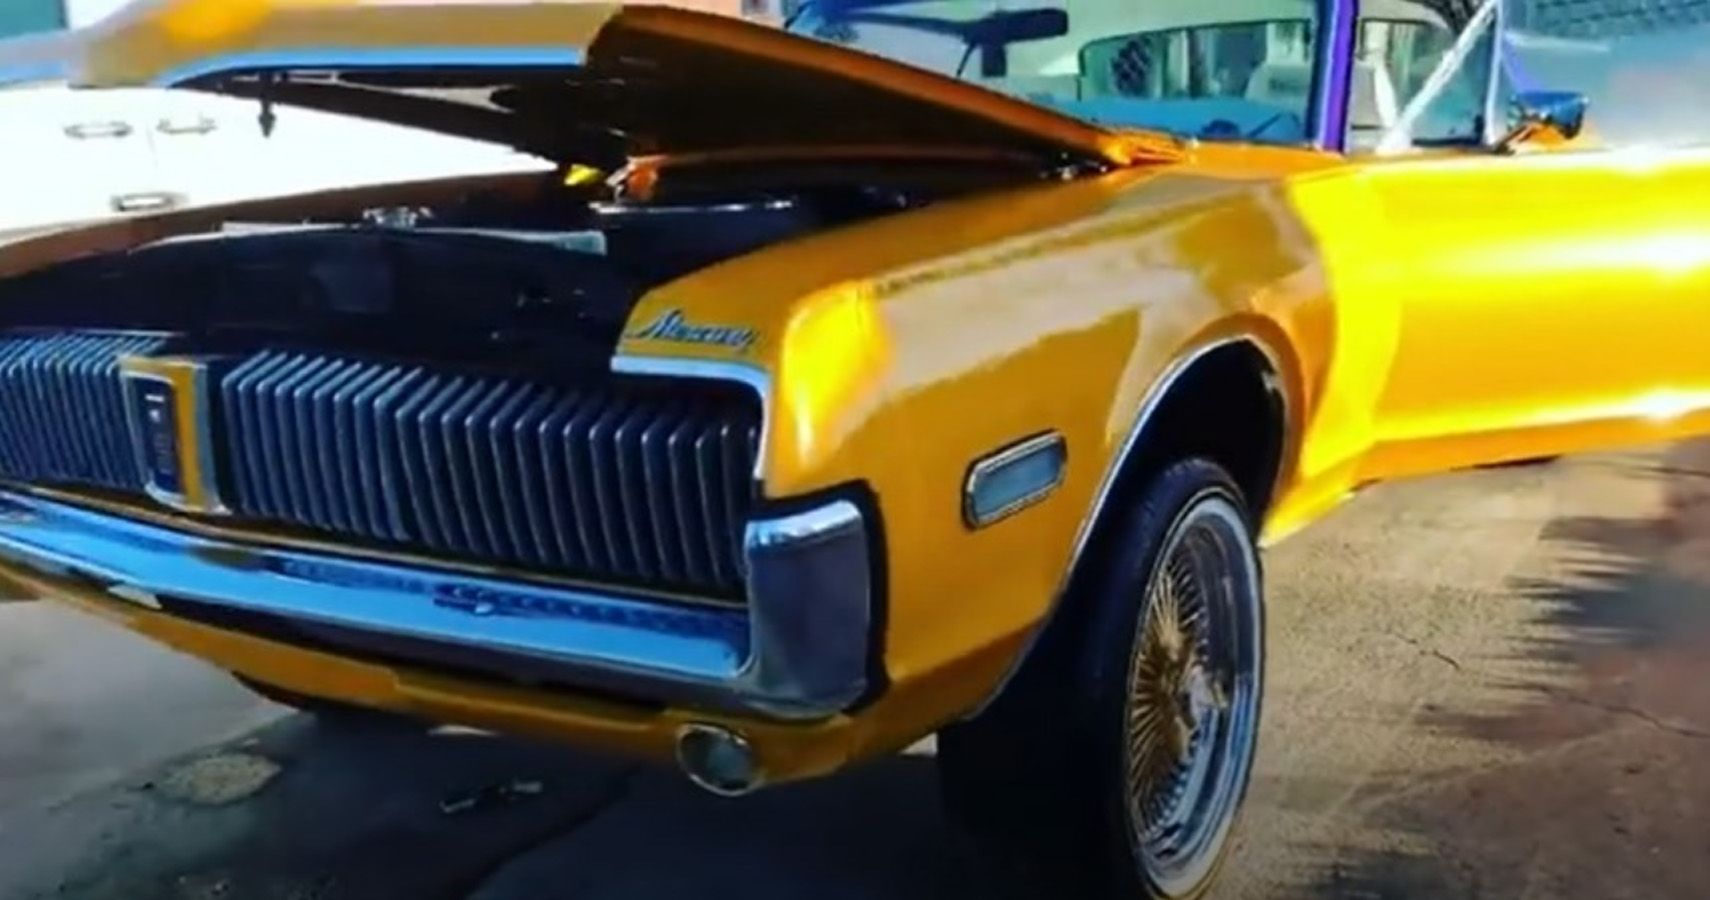 Gold 1968 Ford Mercury Cougar with hood and side door open